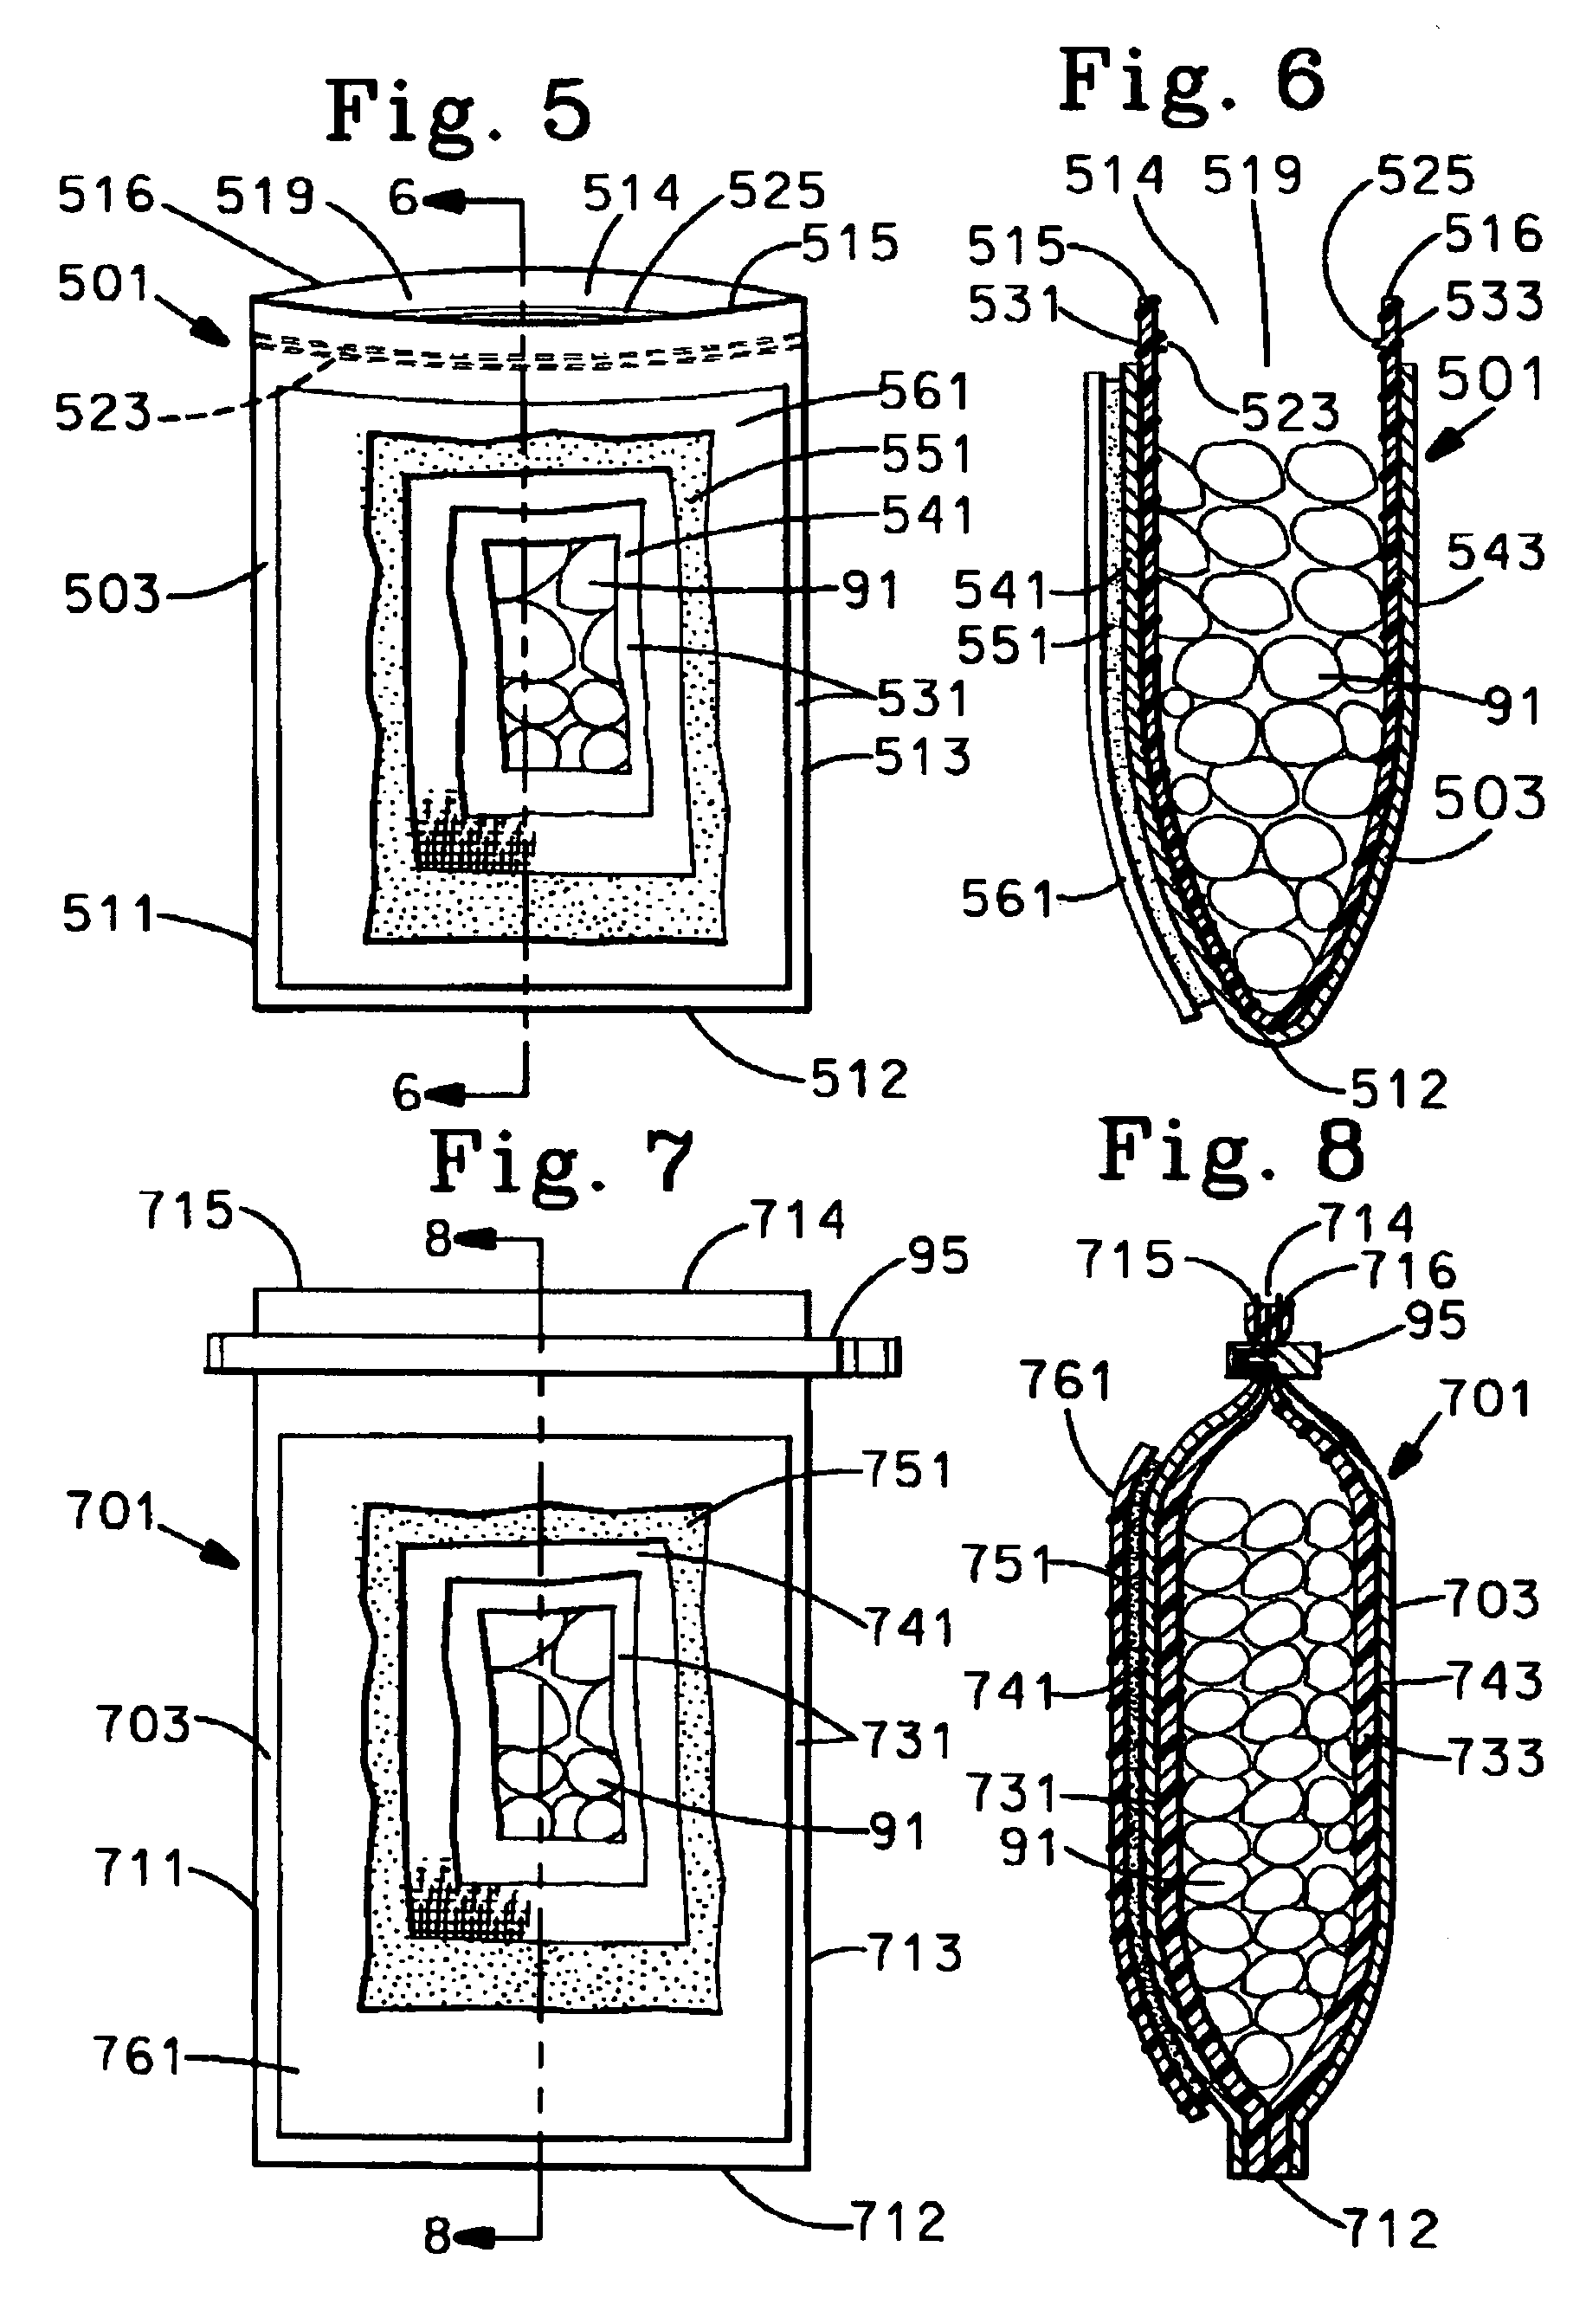 Non-slip ice bag device and method for using same to treat patients